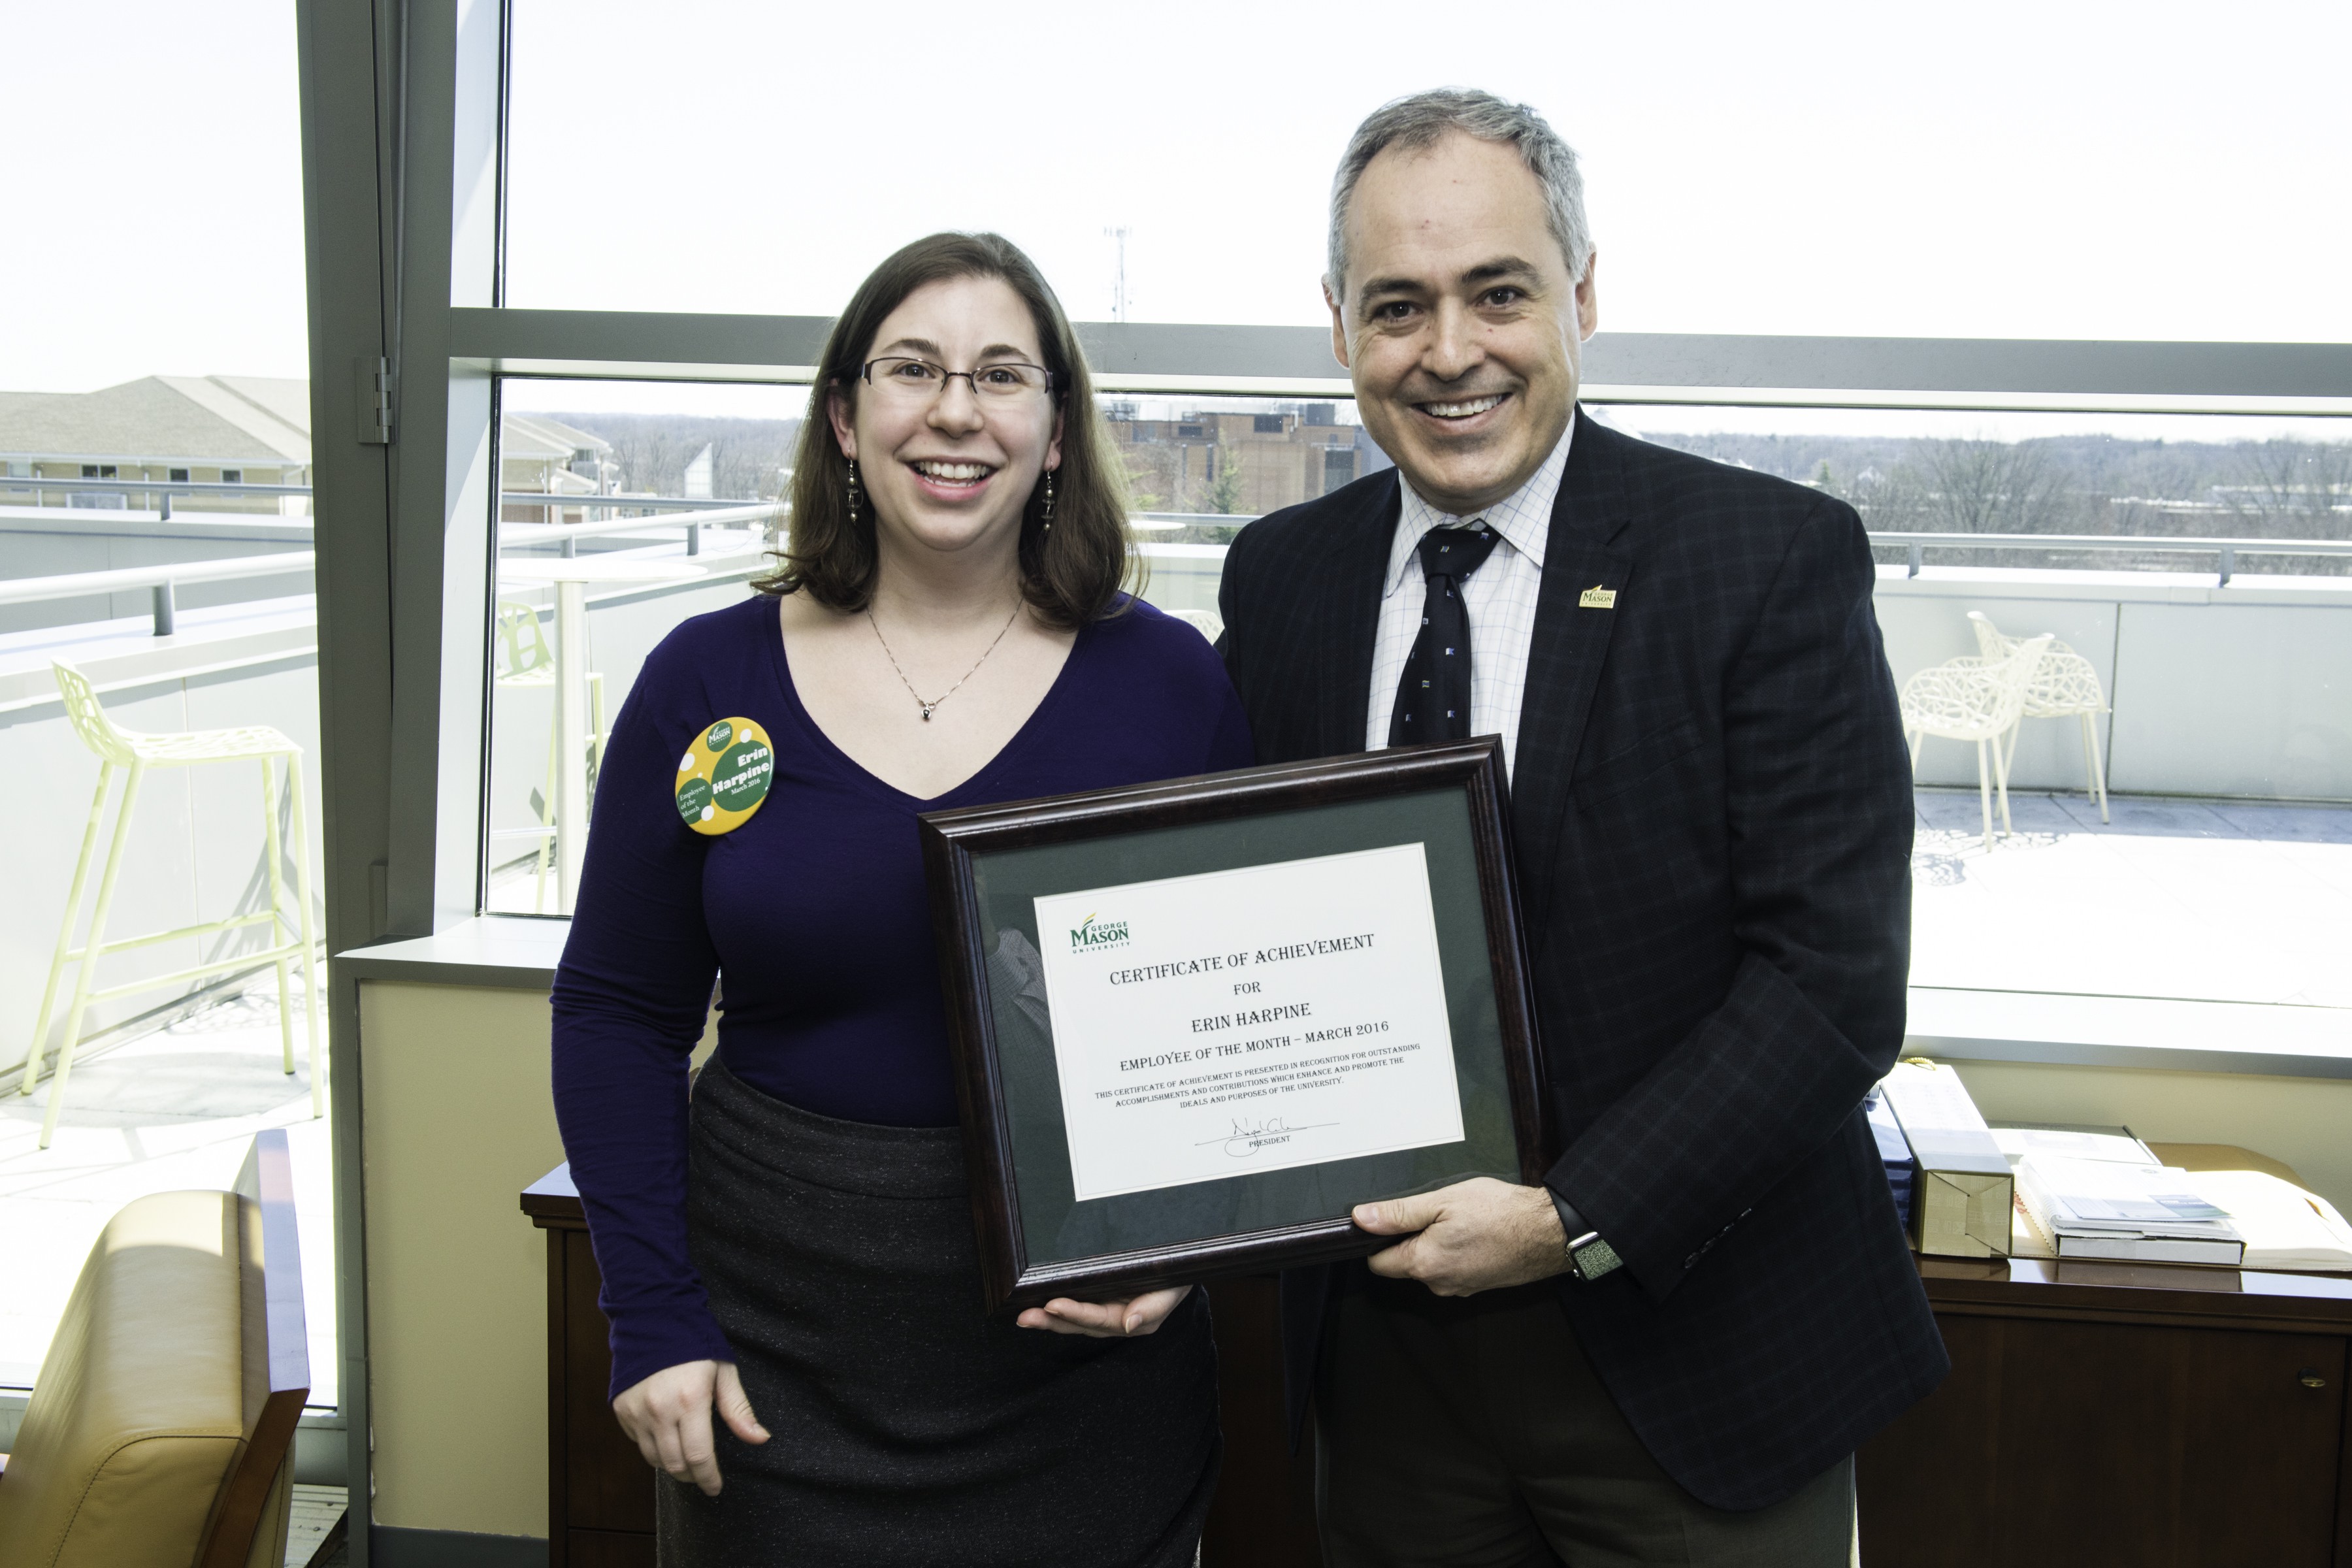 Erin Harpine, patient advocate and special projects coordinator for George Mason University’s Student Health Services, is the March 2016 Employee of the Month.